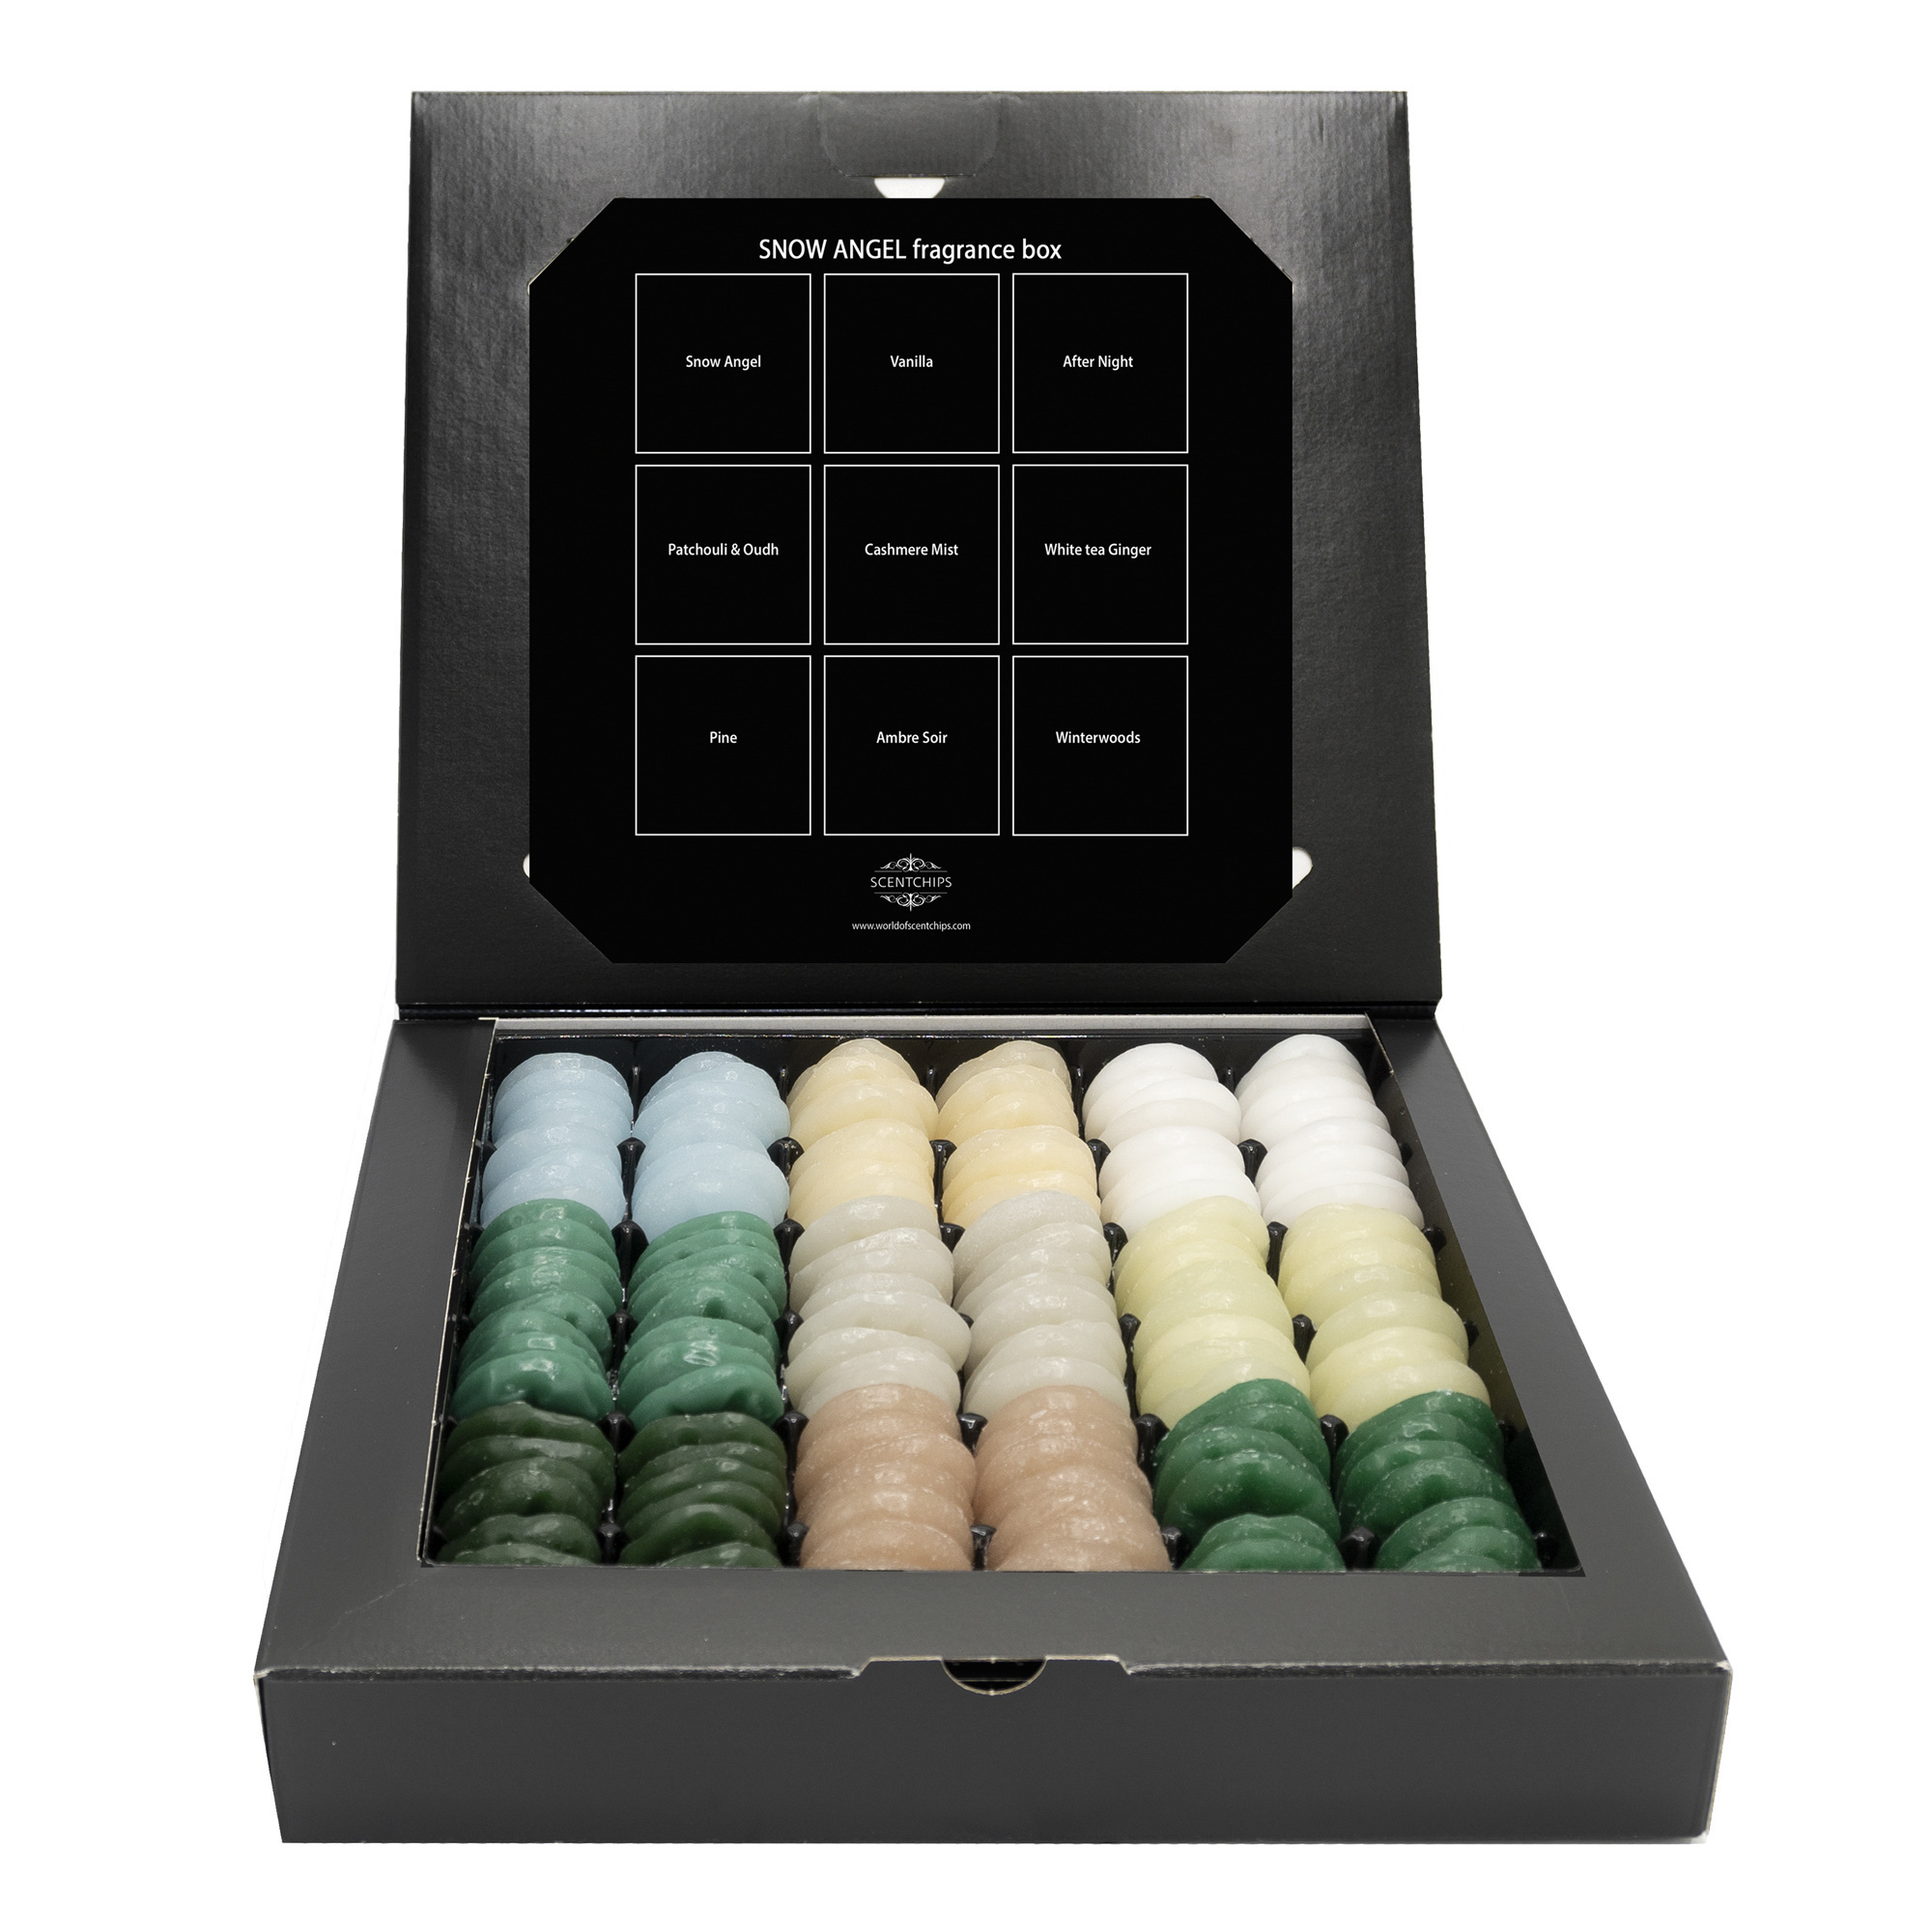 Scentchips® Snow Angel winter gift set 144 scented wax melts